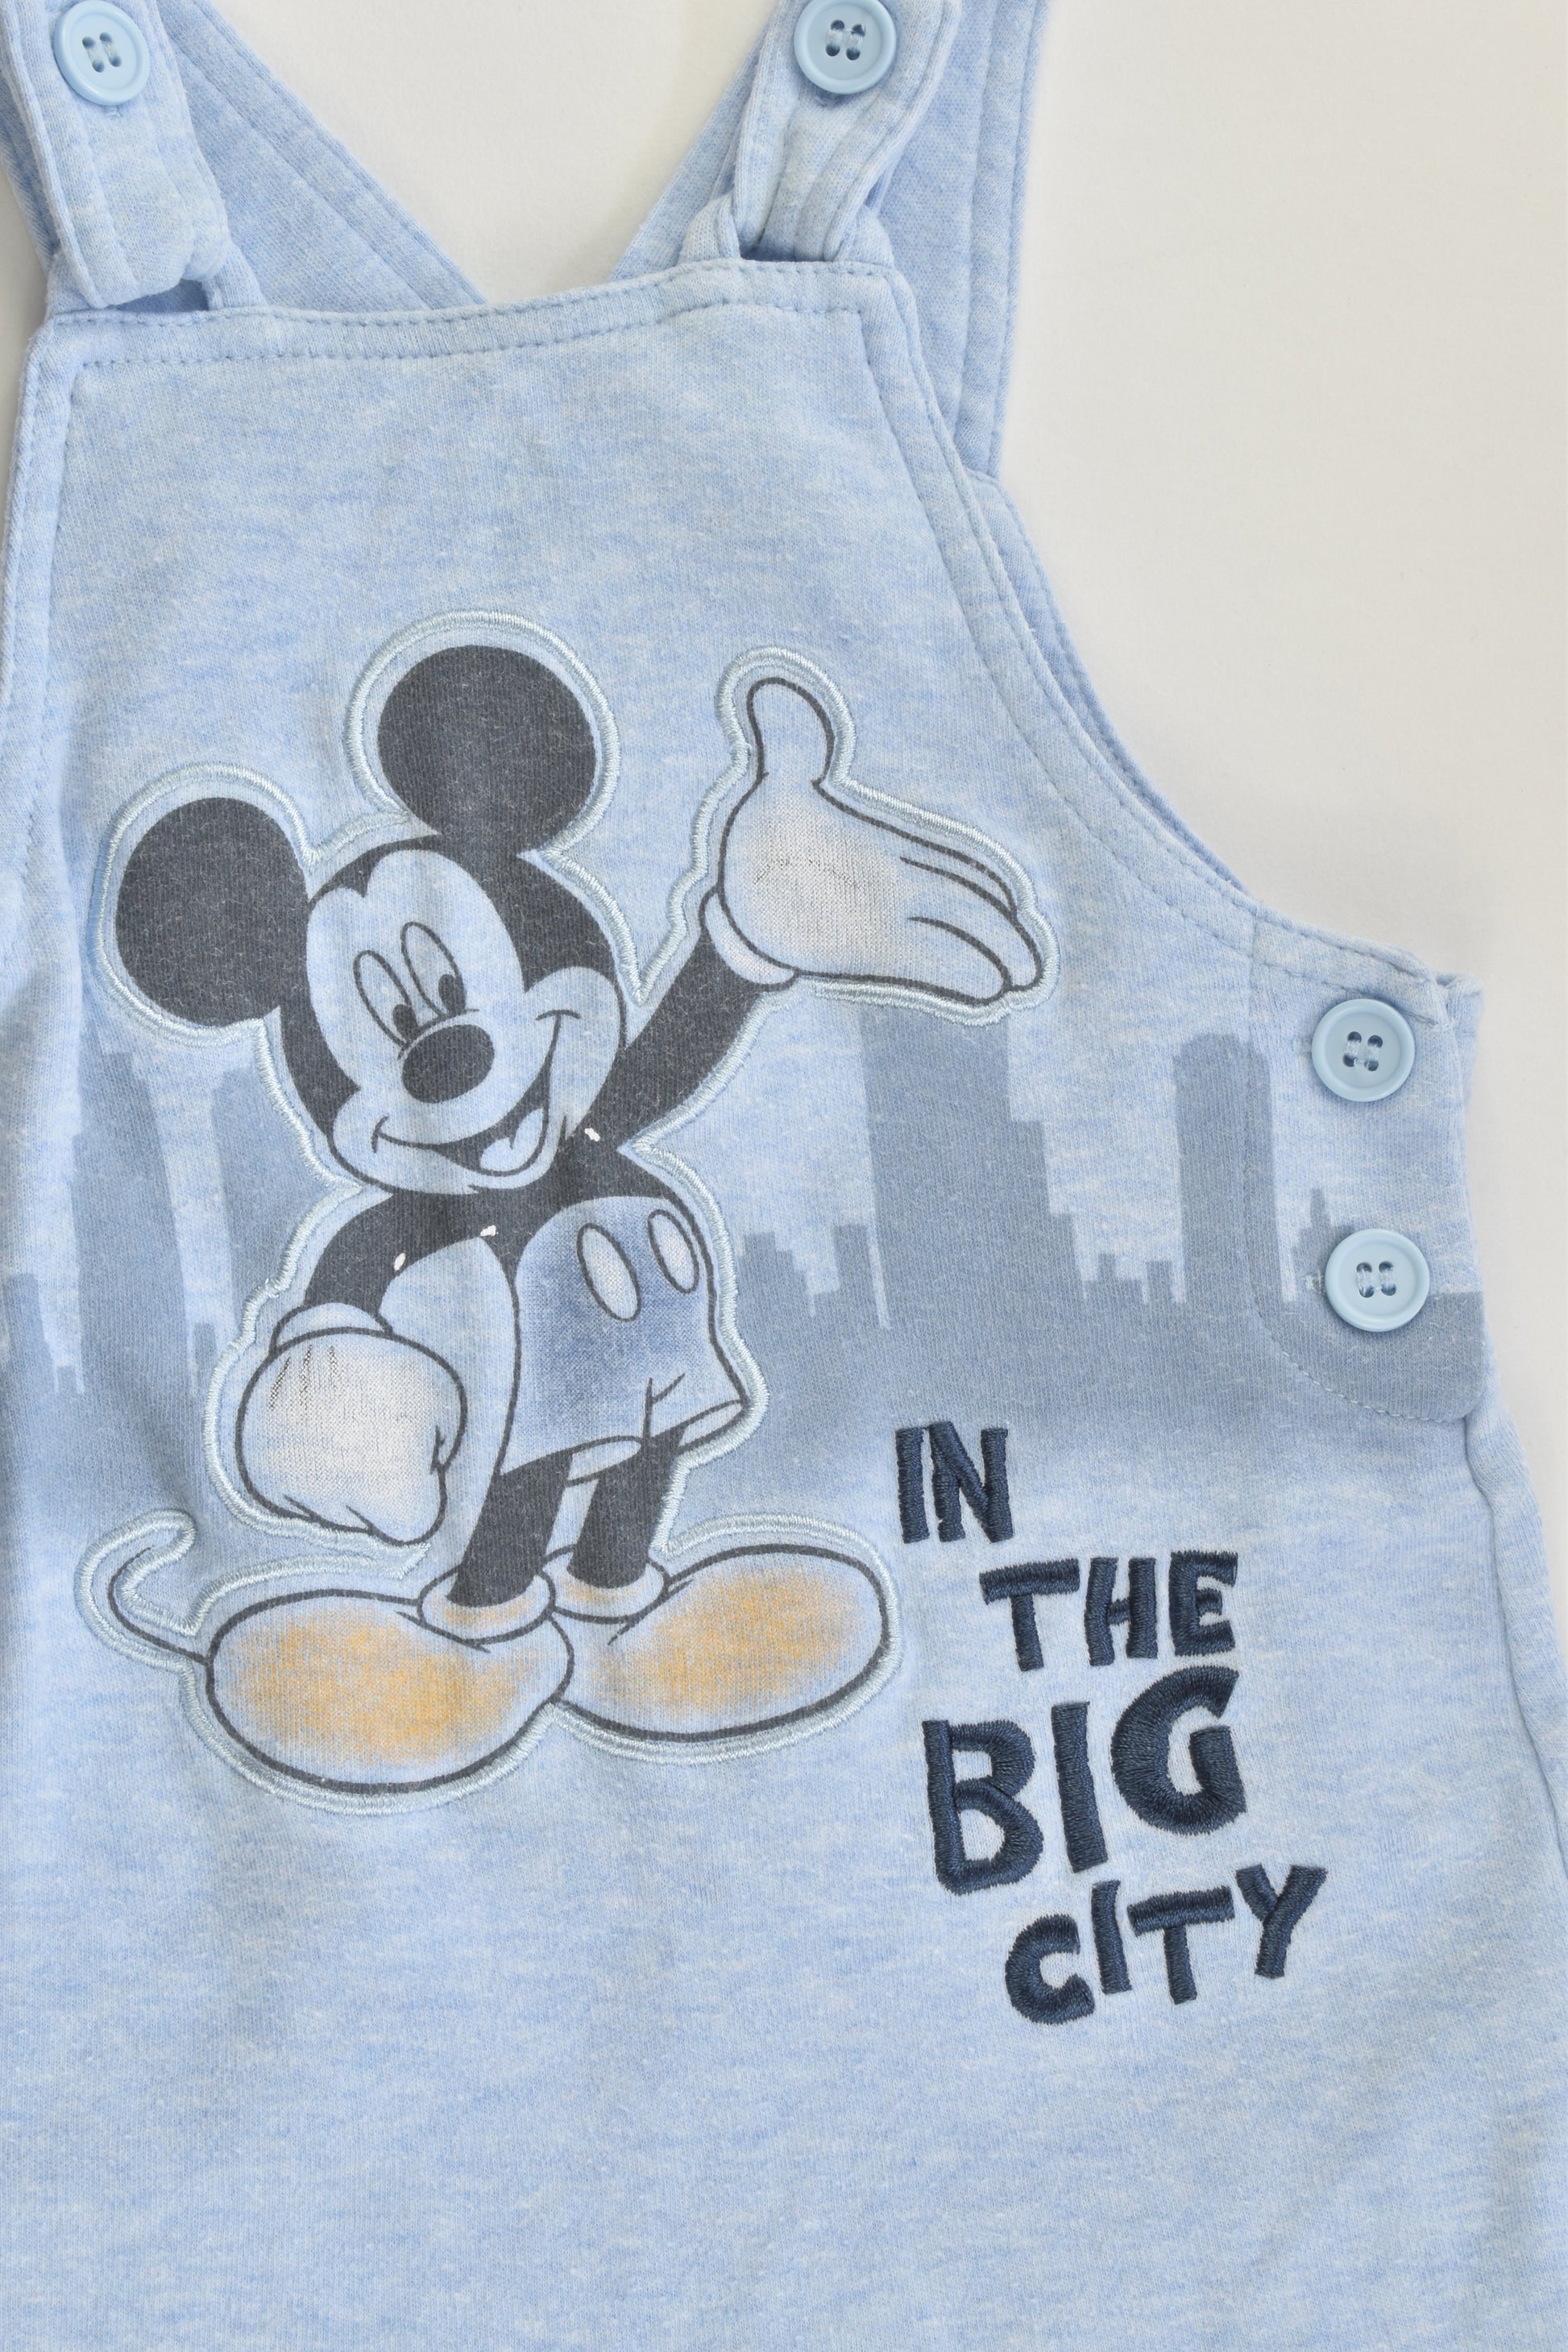 Disney Baby Size 0 (6-9 months) Mickey Mouse 'In The City' Overalls